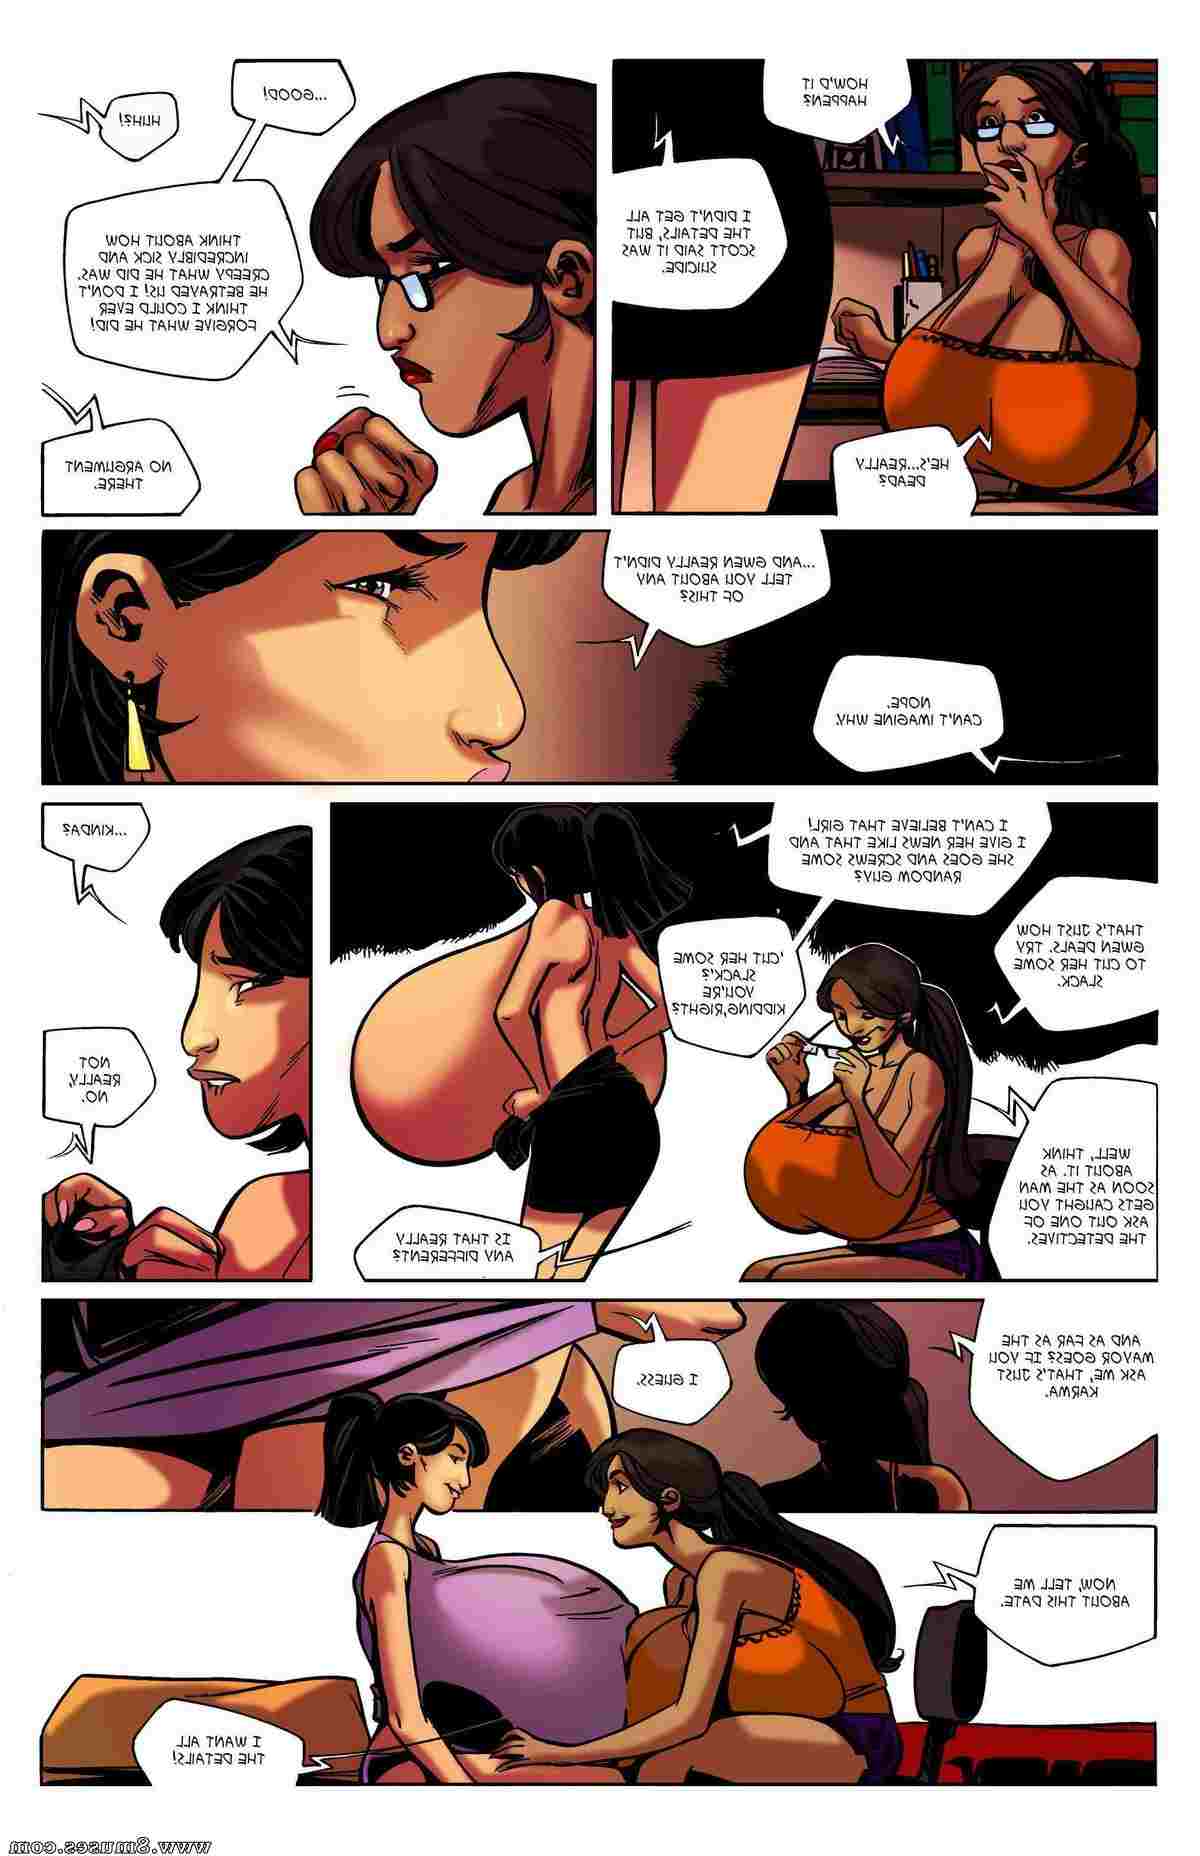 BE-Story-Club-Comics/Welcome-to-Chastity Welcome_to_Chastity__8muses_-_Sex_and_Porn_Comics_84.jpg